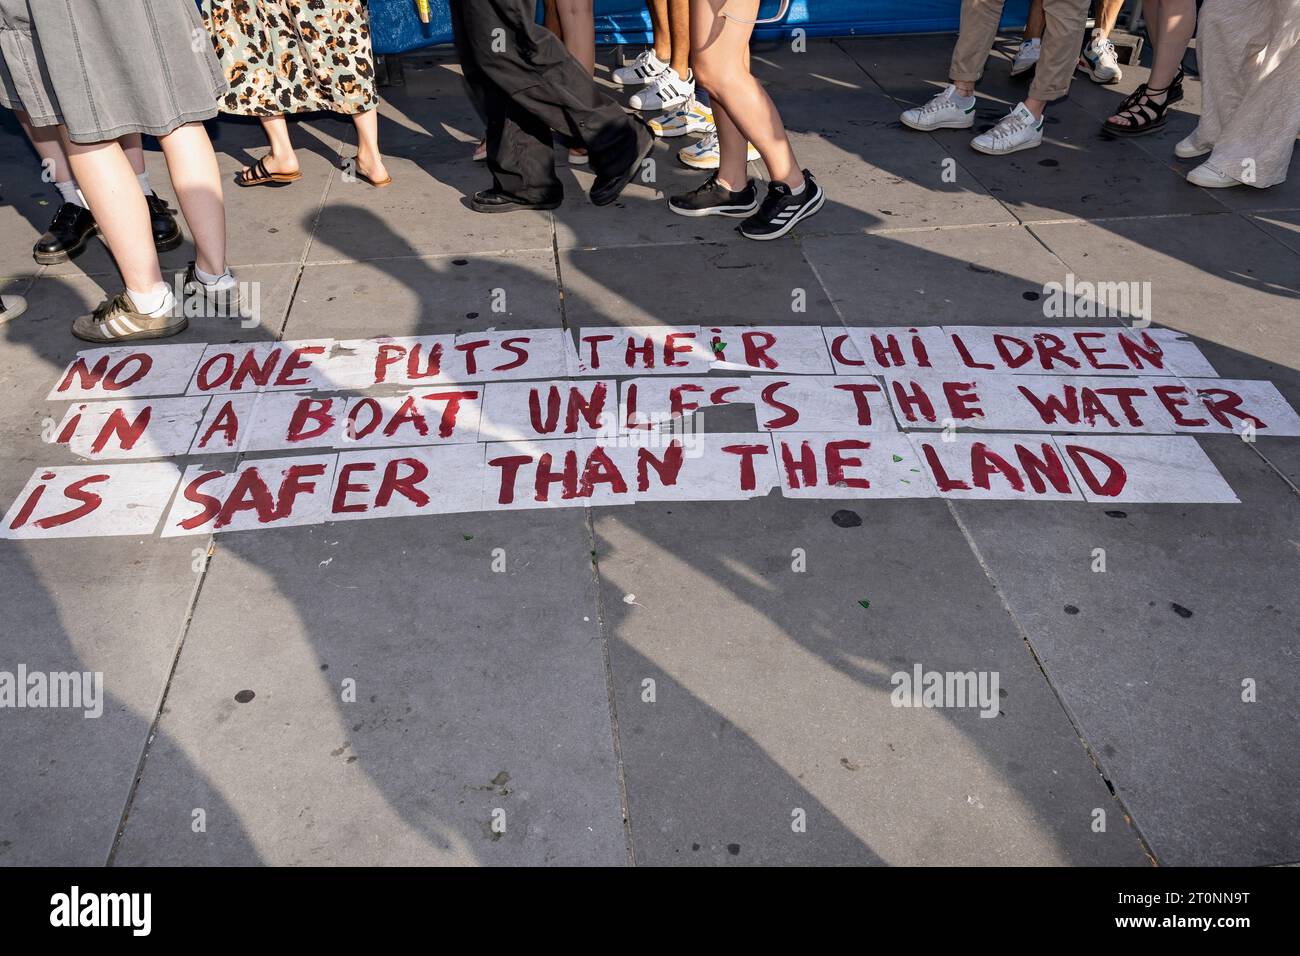 Message about immigration, reading “No one puts their children in a boat unless the water is safer than the land”. Paris, France, Europe, EU Stock Photo